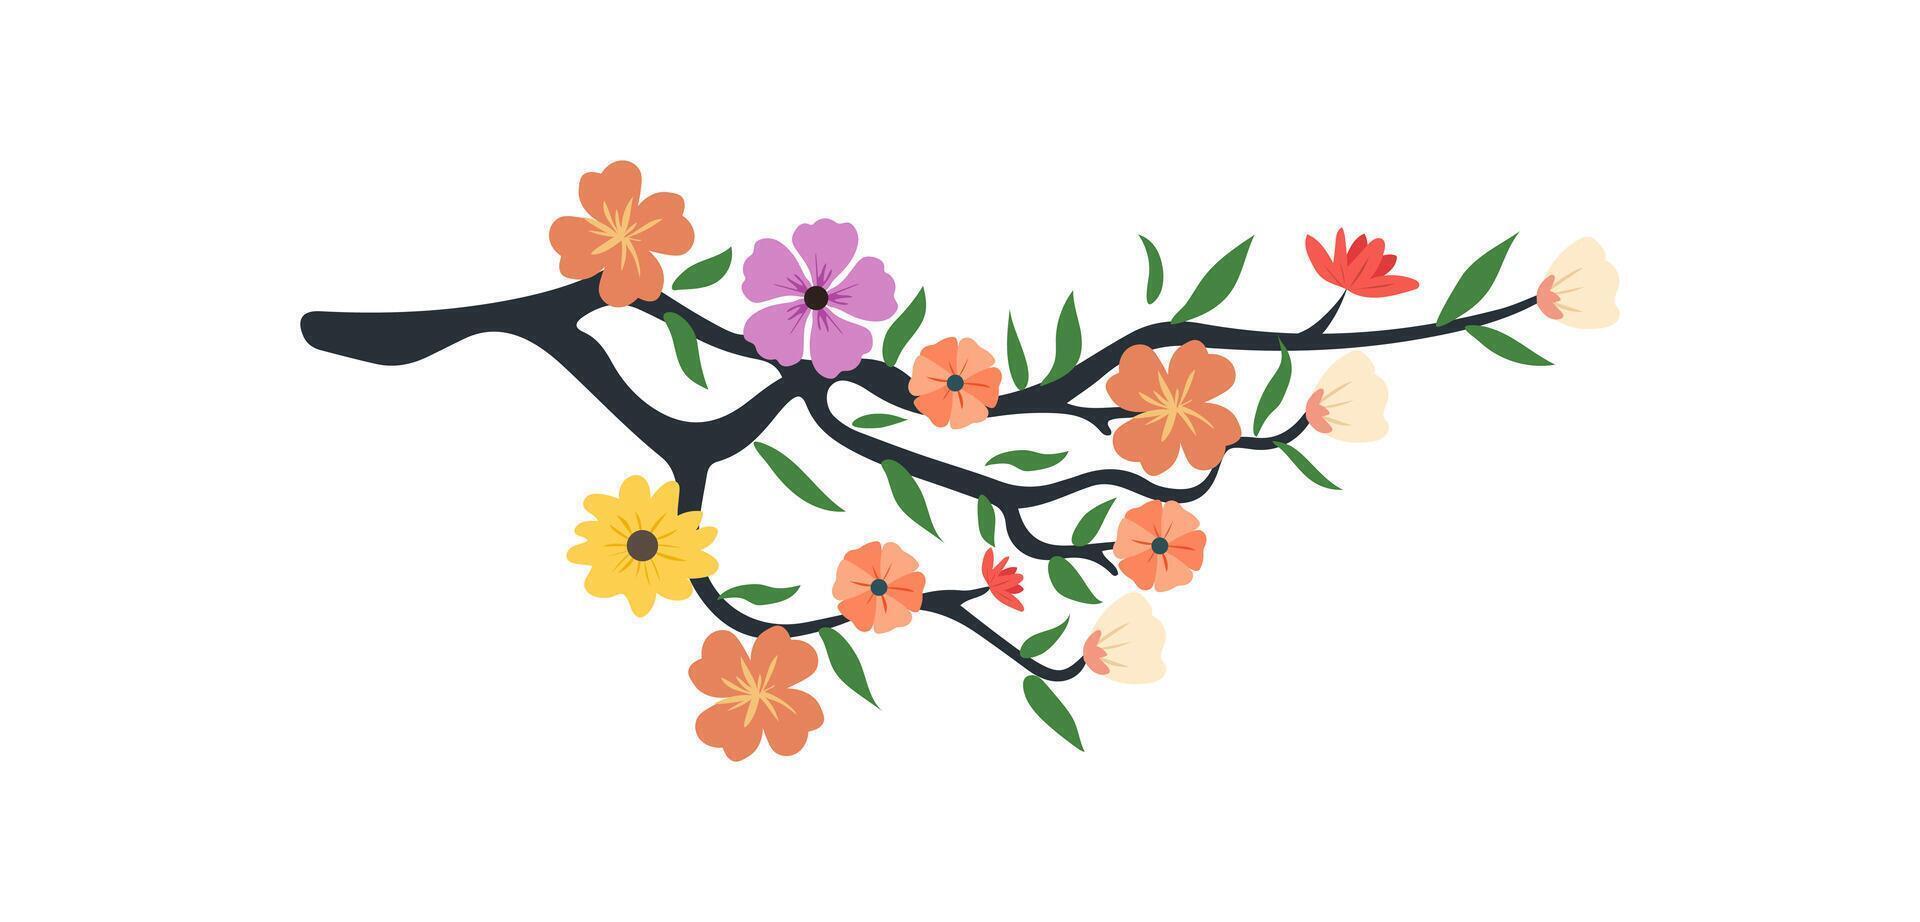 Spring flowers tree branch, blossom floral isolated on white background, garden leaves tree branch illustration vector